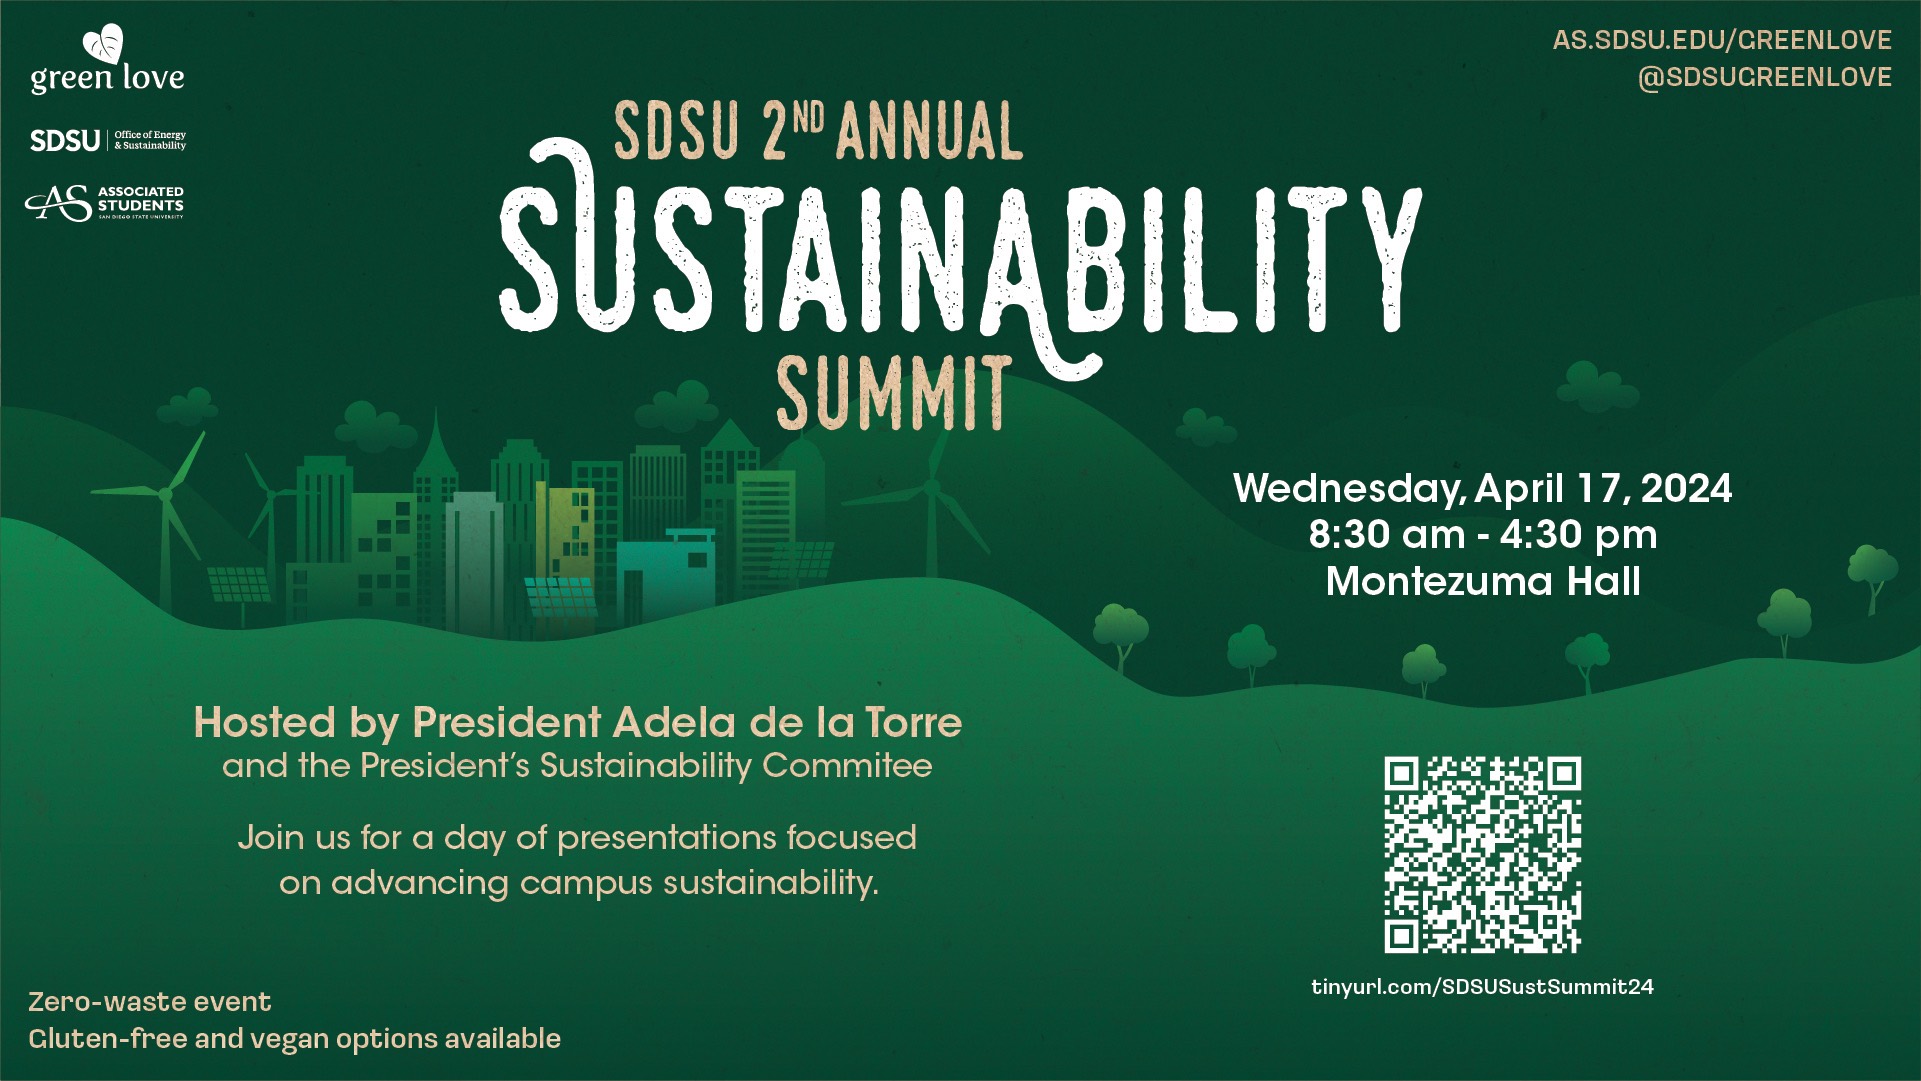 Green background with yellow and white text that says "SDSU 2nd Annual Sustainability Summit". For more information, please visit https://sustainable.sdsu.edu/highlights/news/sustainability-articles/sustainabilitysummit.